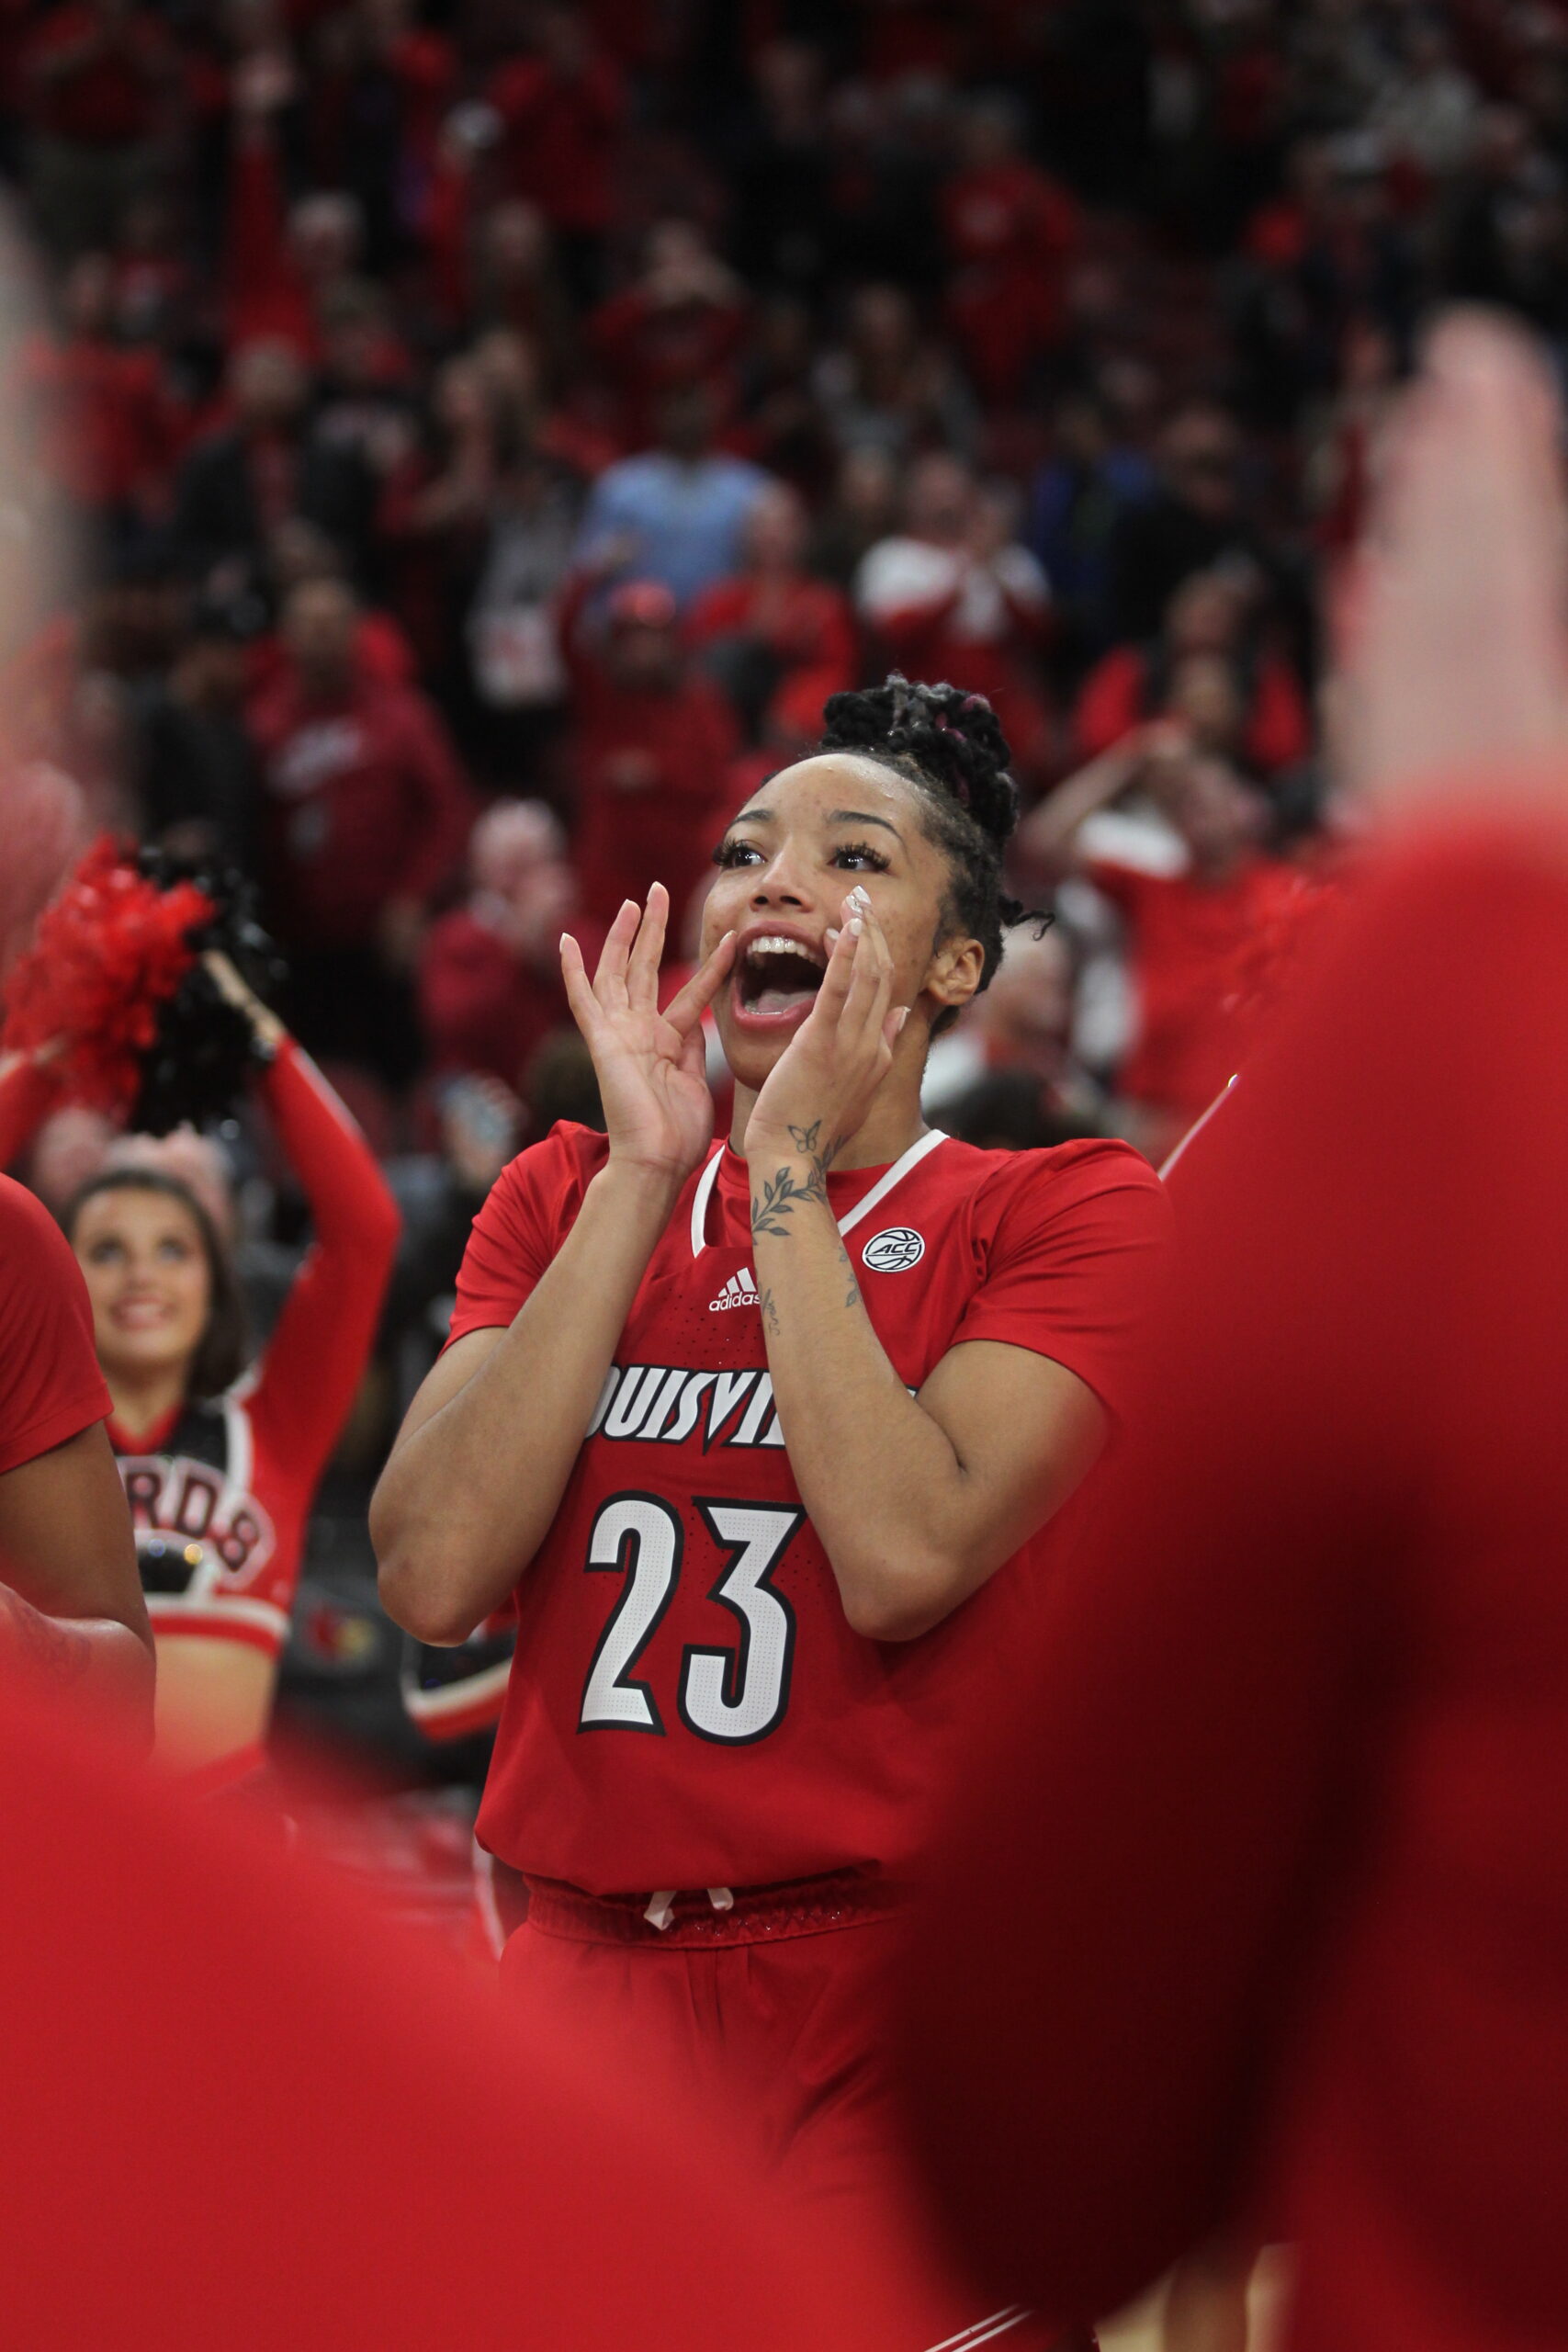 Preview No 18 Louisville Womens Basketball To Face Morehead State On Wednesday The